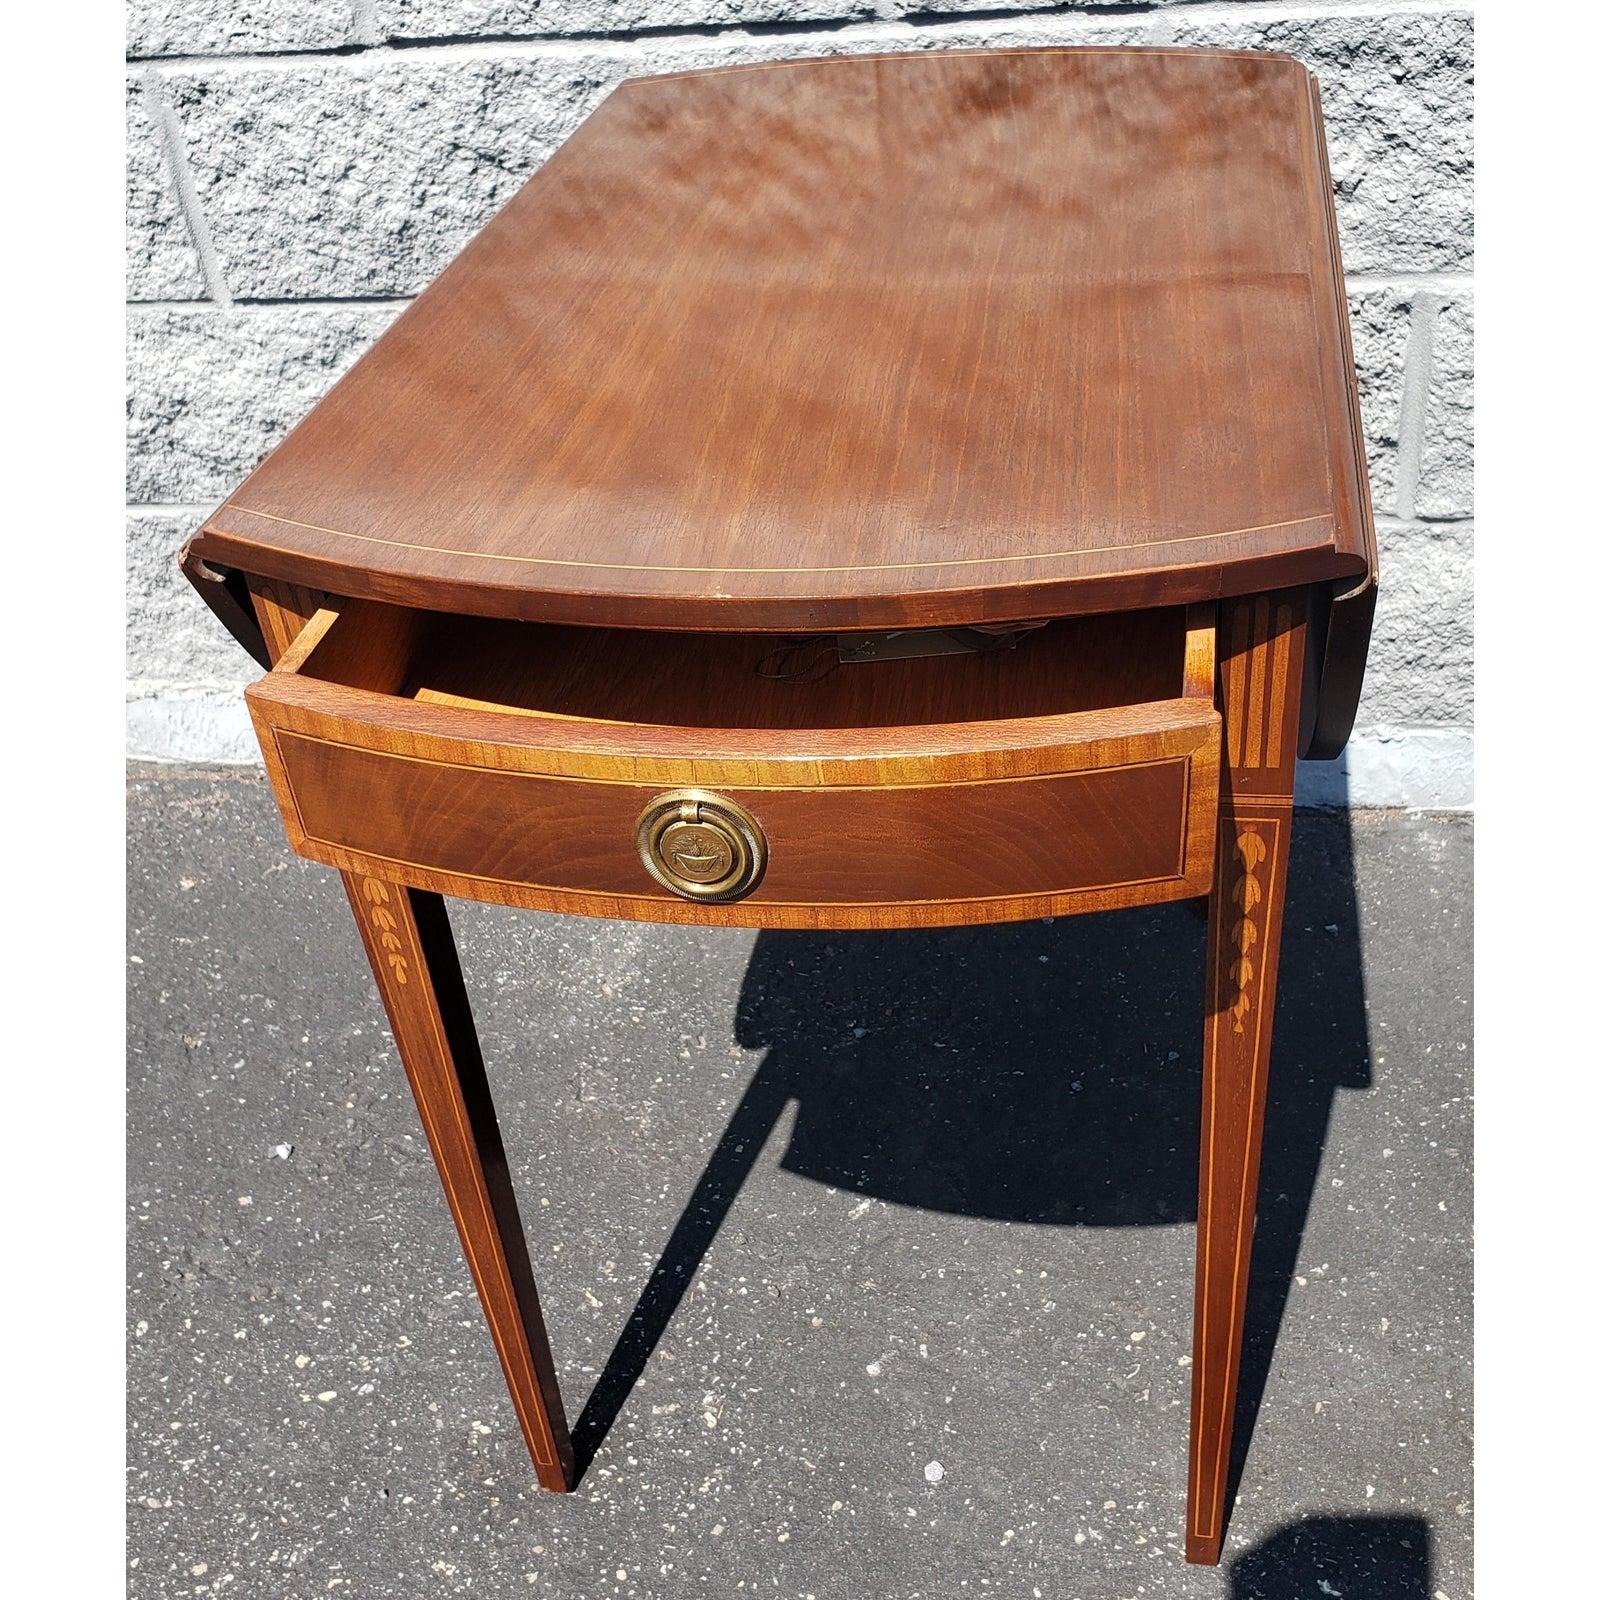 Appliqué 1970s Chippendale Inlaid Mahogany and Satin Wood Drop Leaf Pembroke Table